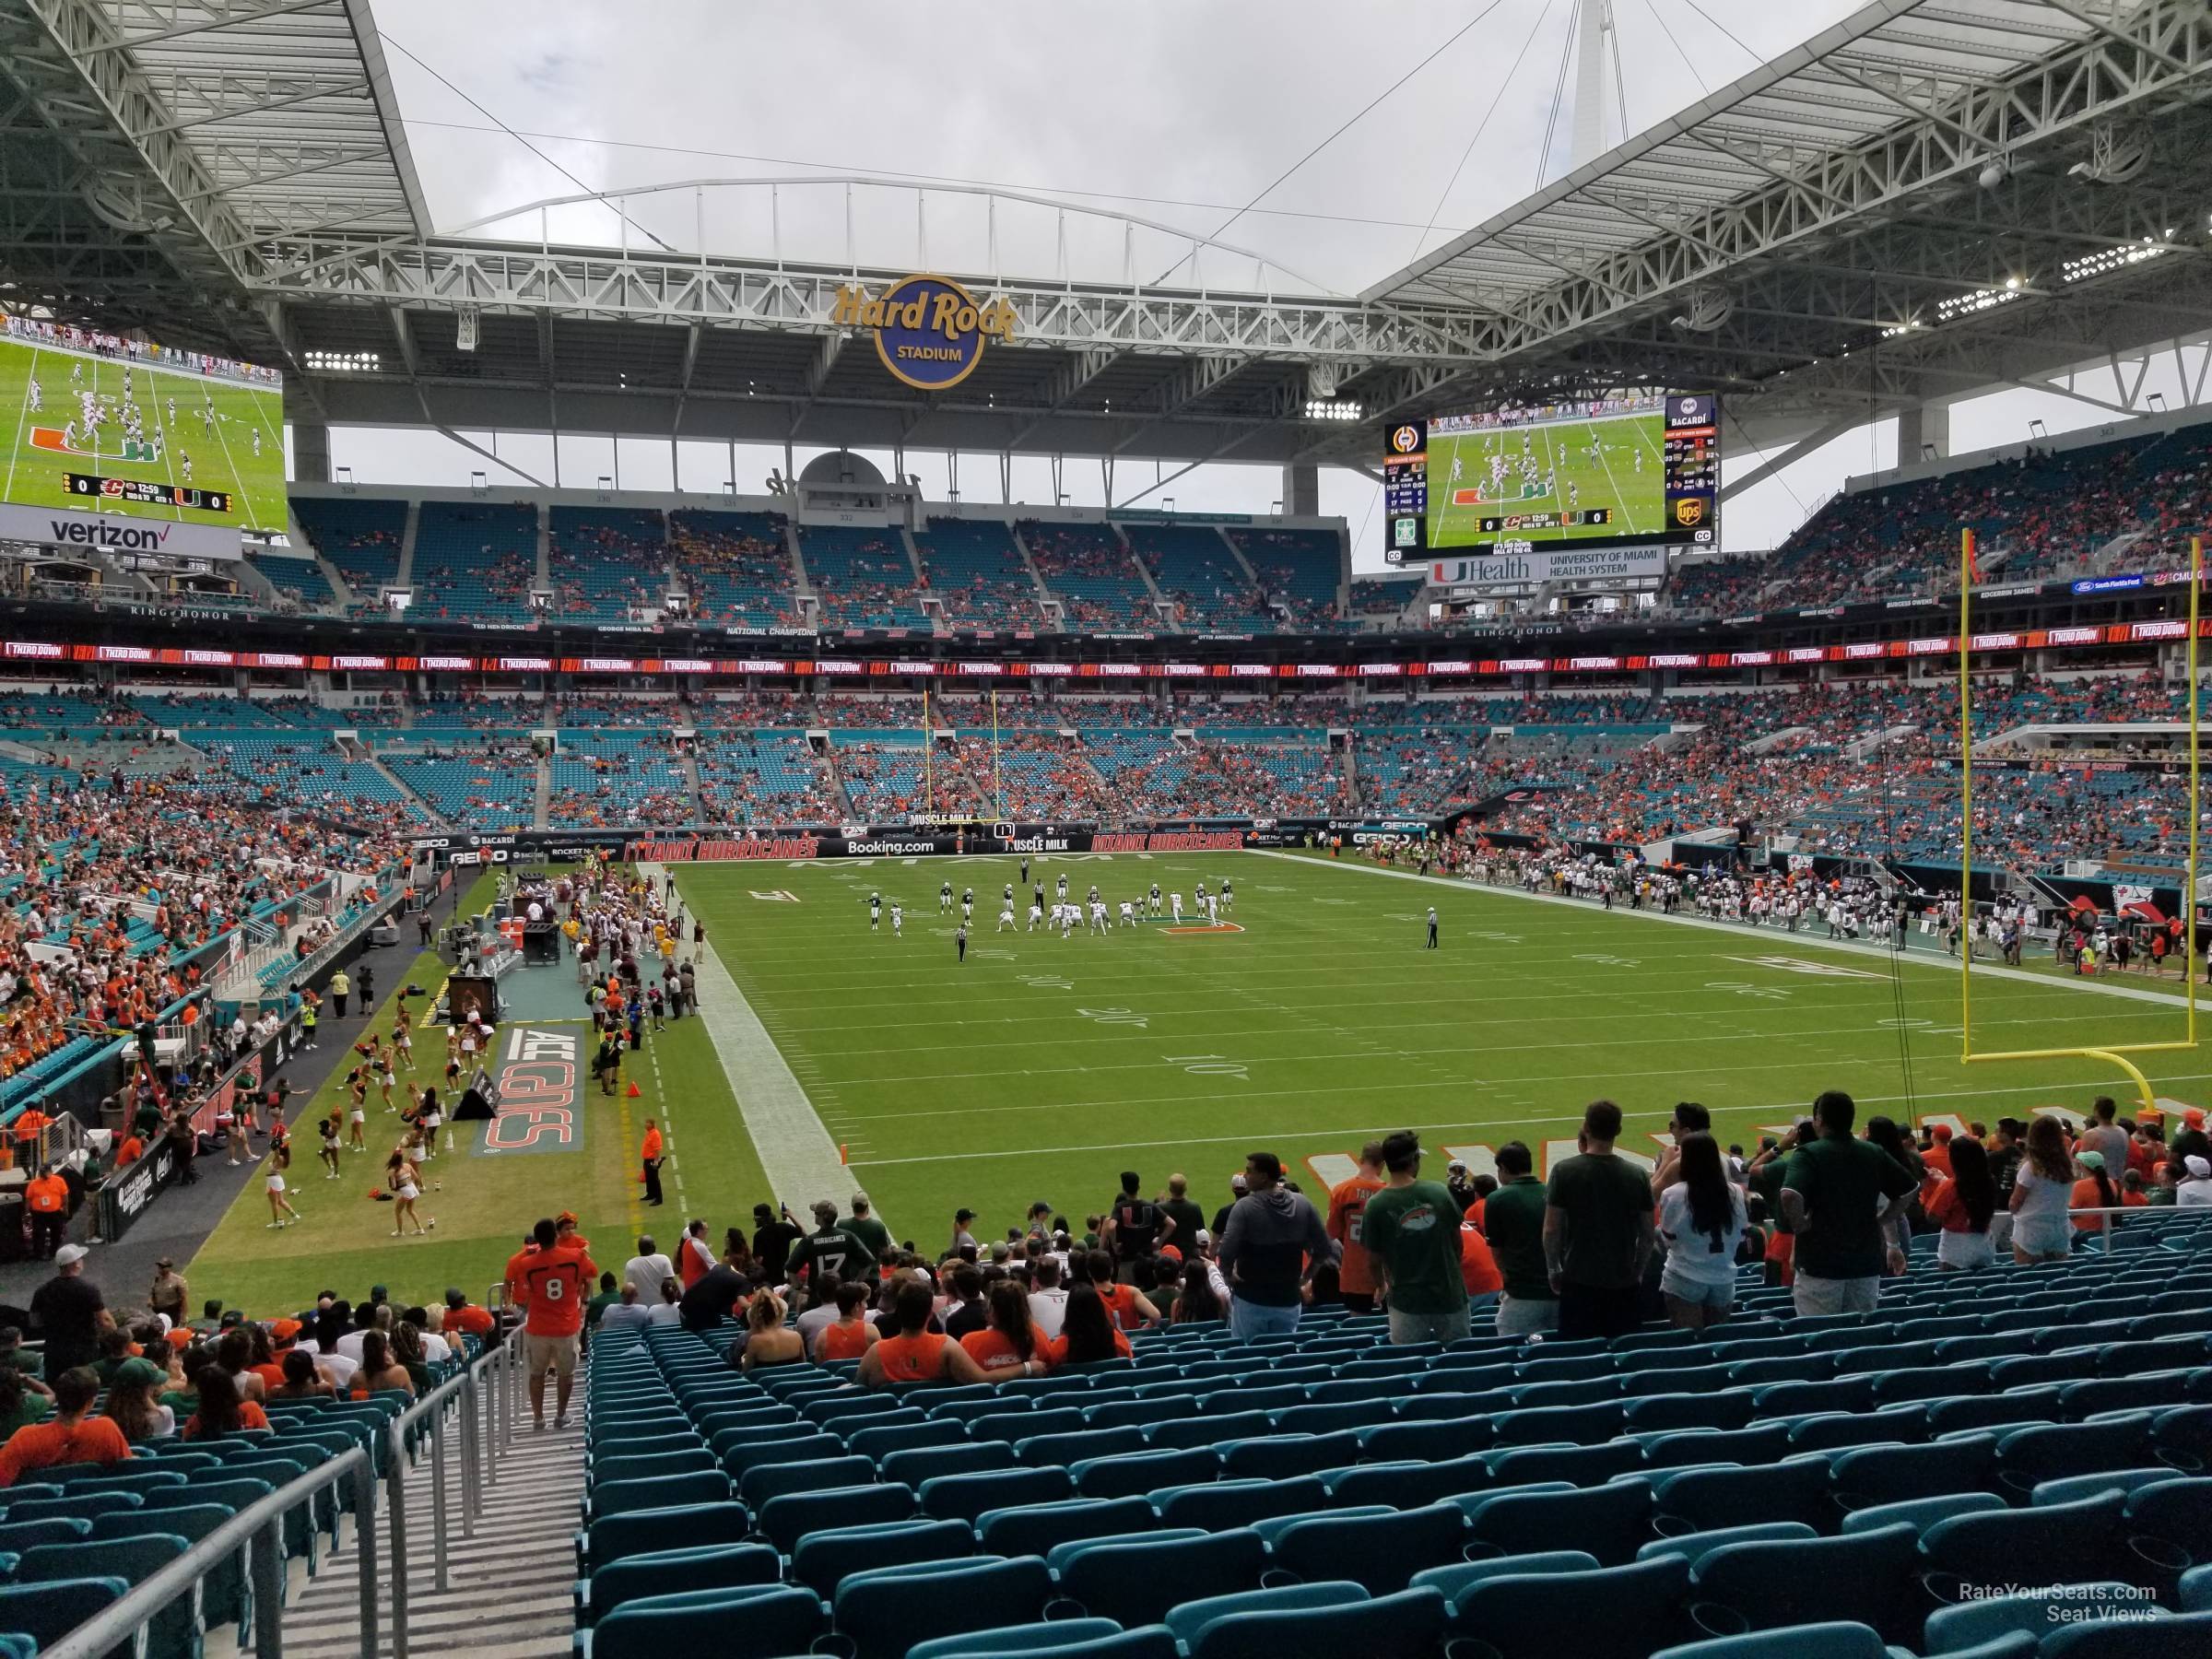 section 106, row 28 seat view  for football - hard rock stadium